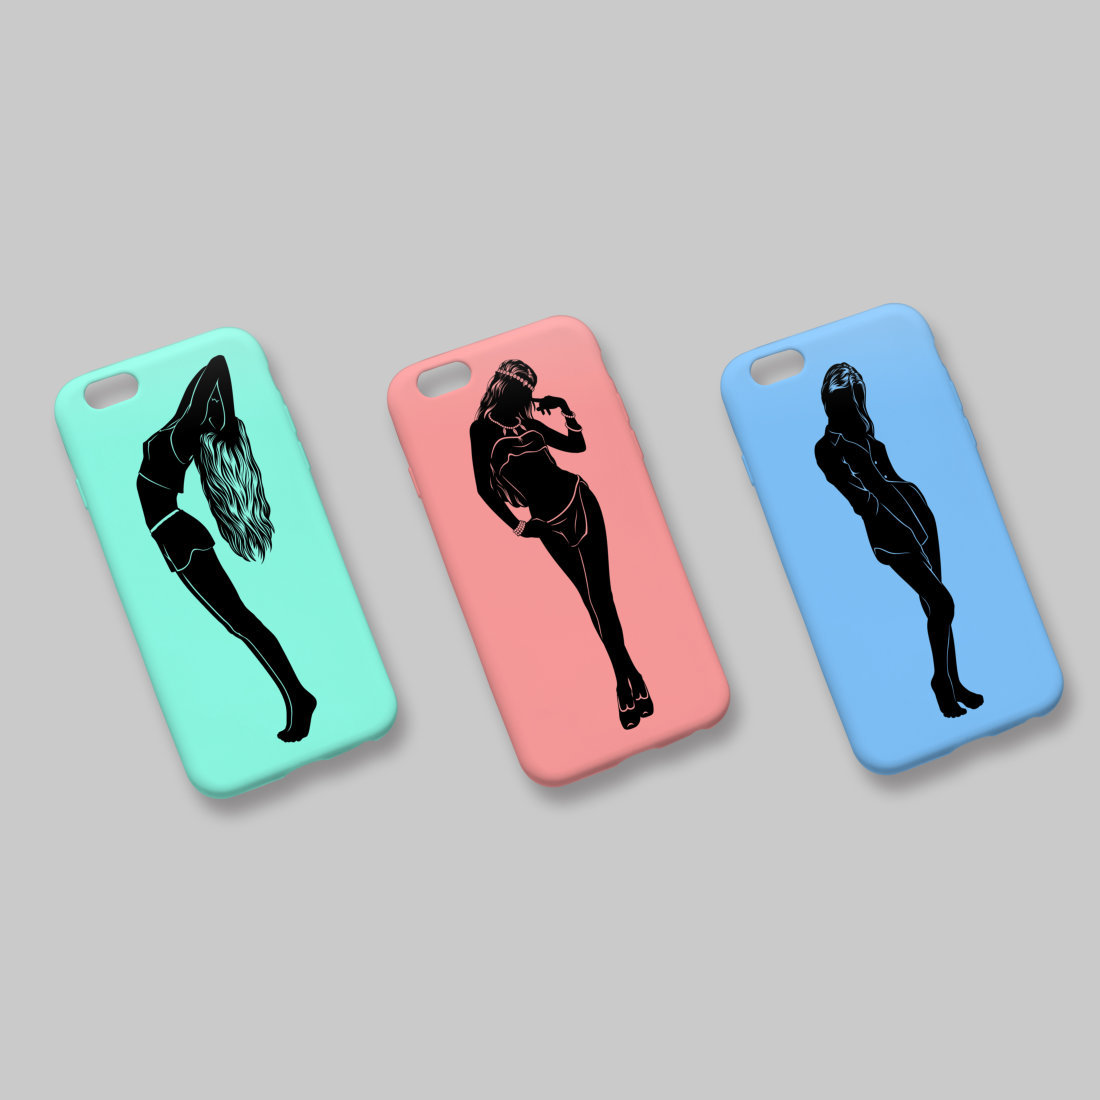 Three phone cases with a woman silhouette on them.